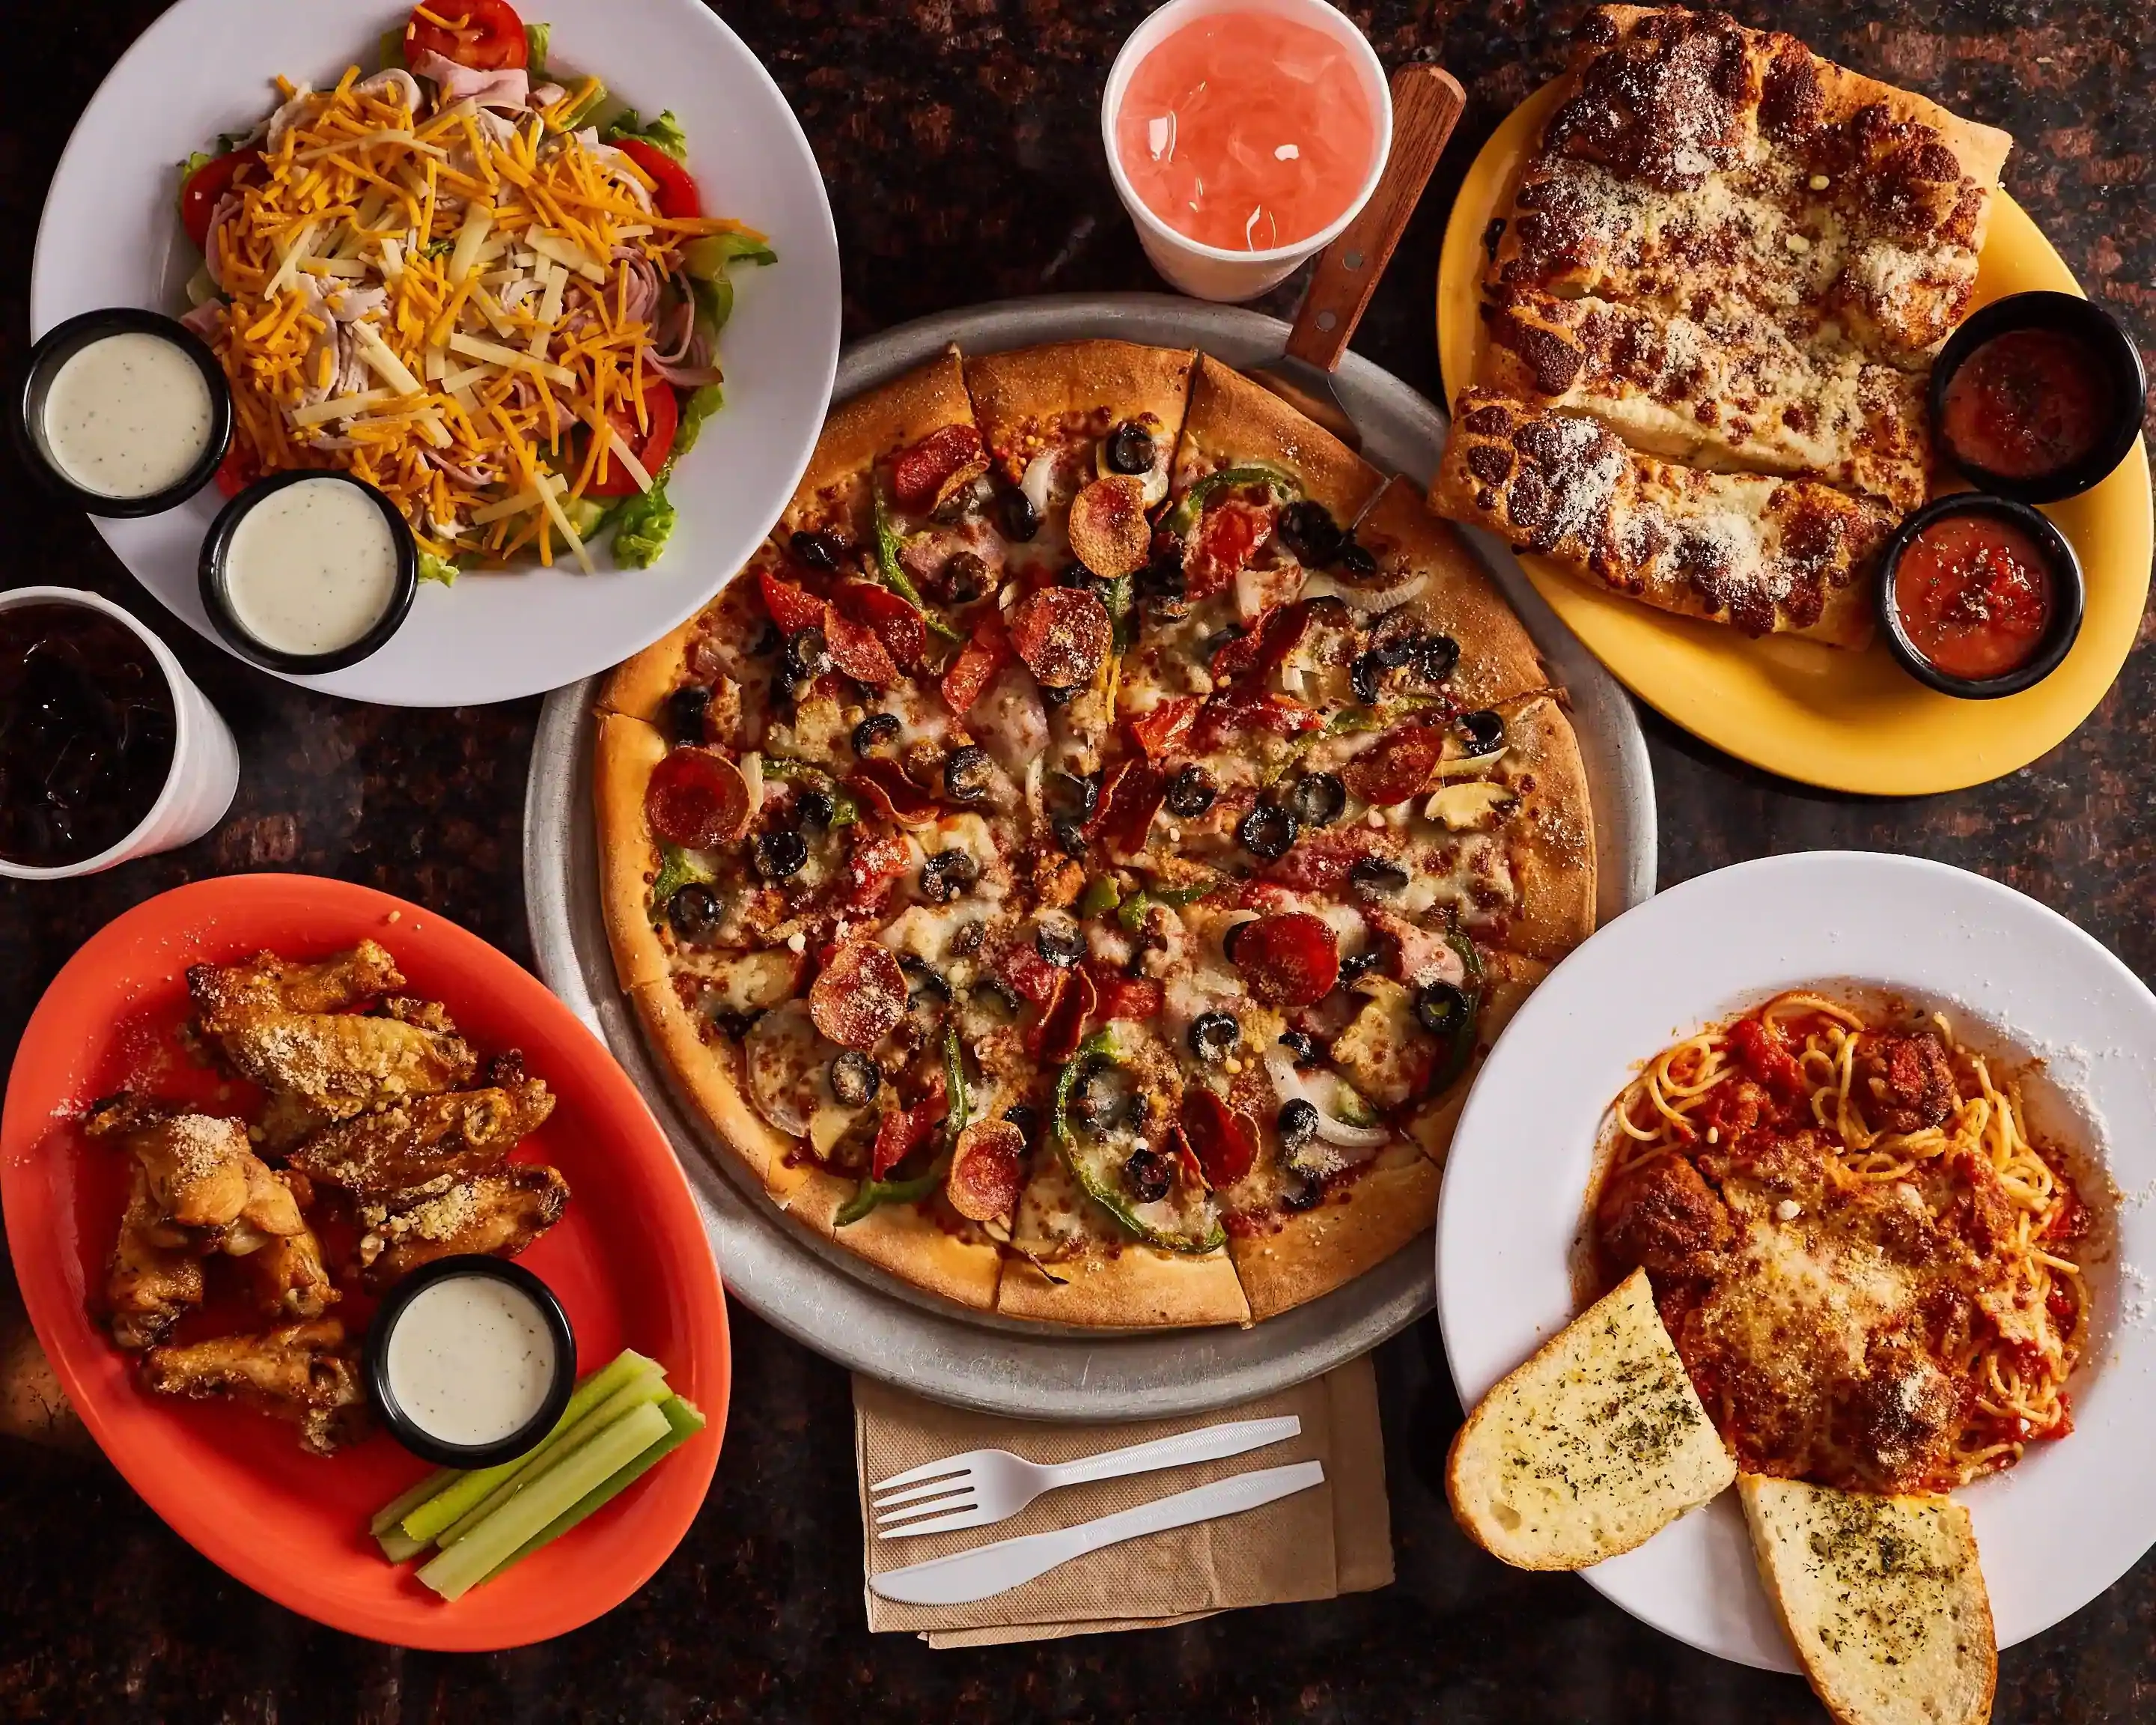 Pizza, Wings, and Salads